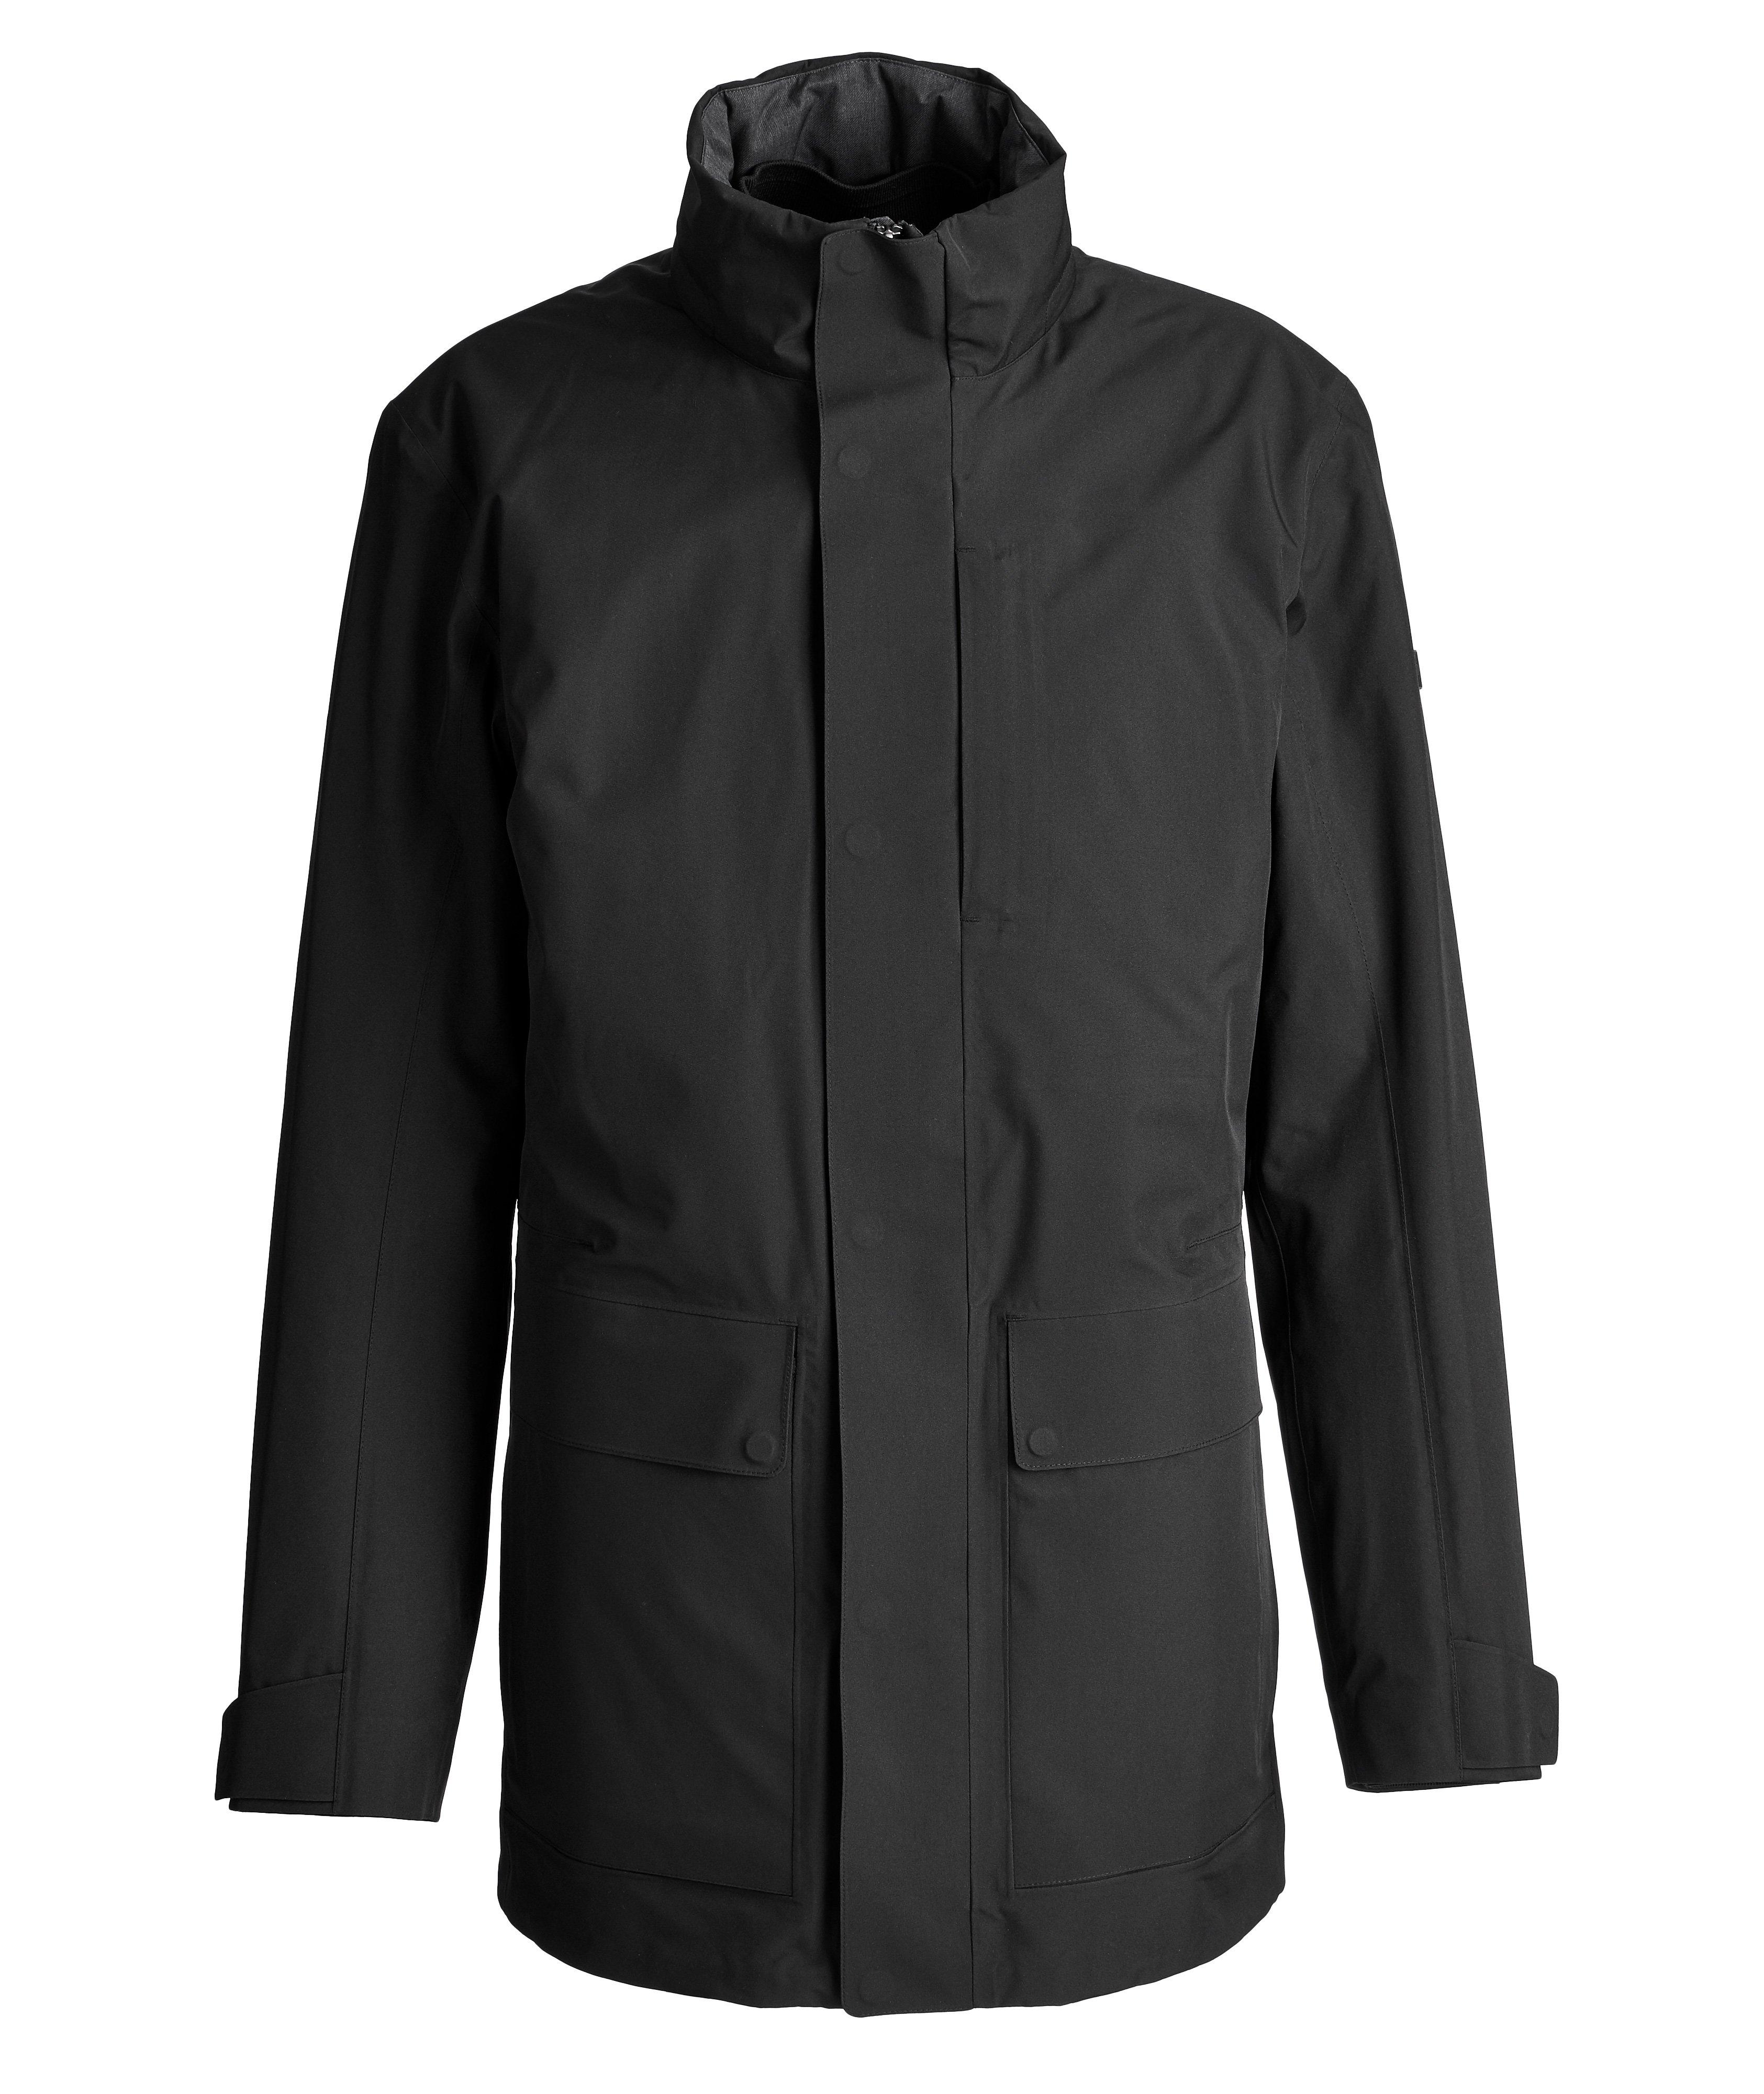 Three-In-One Water-Resistant Jacket image 0